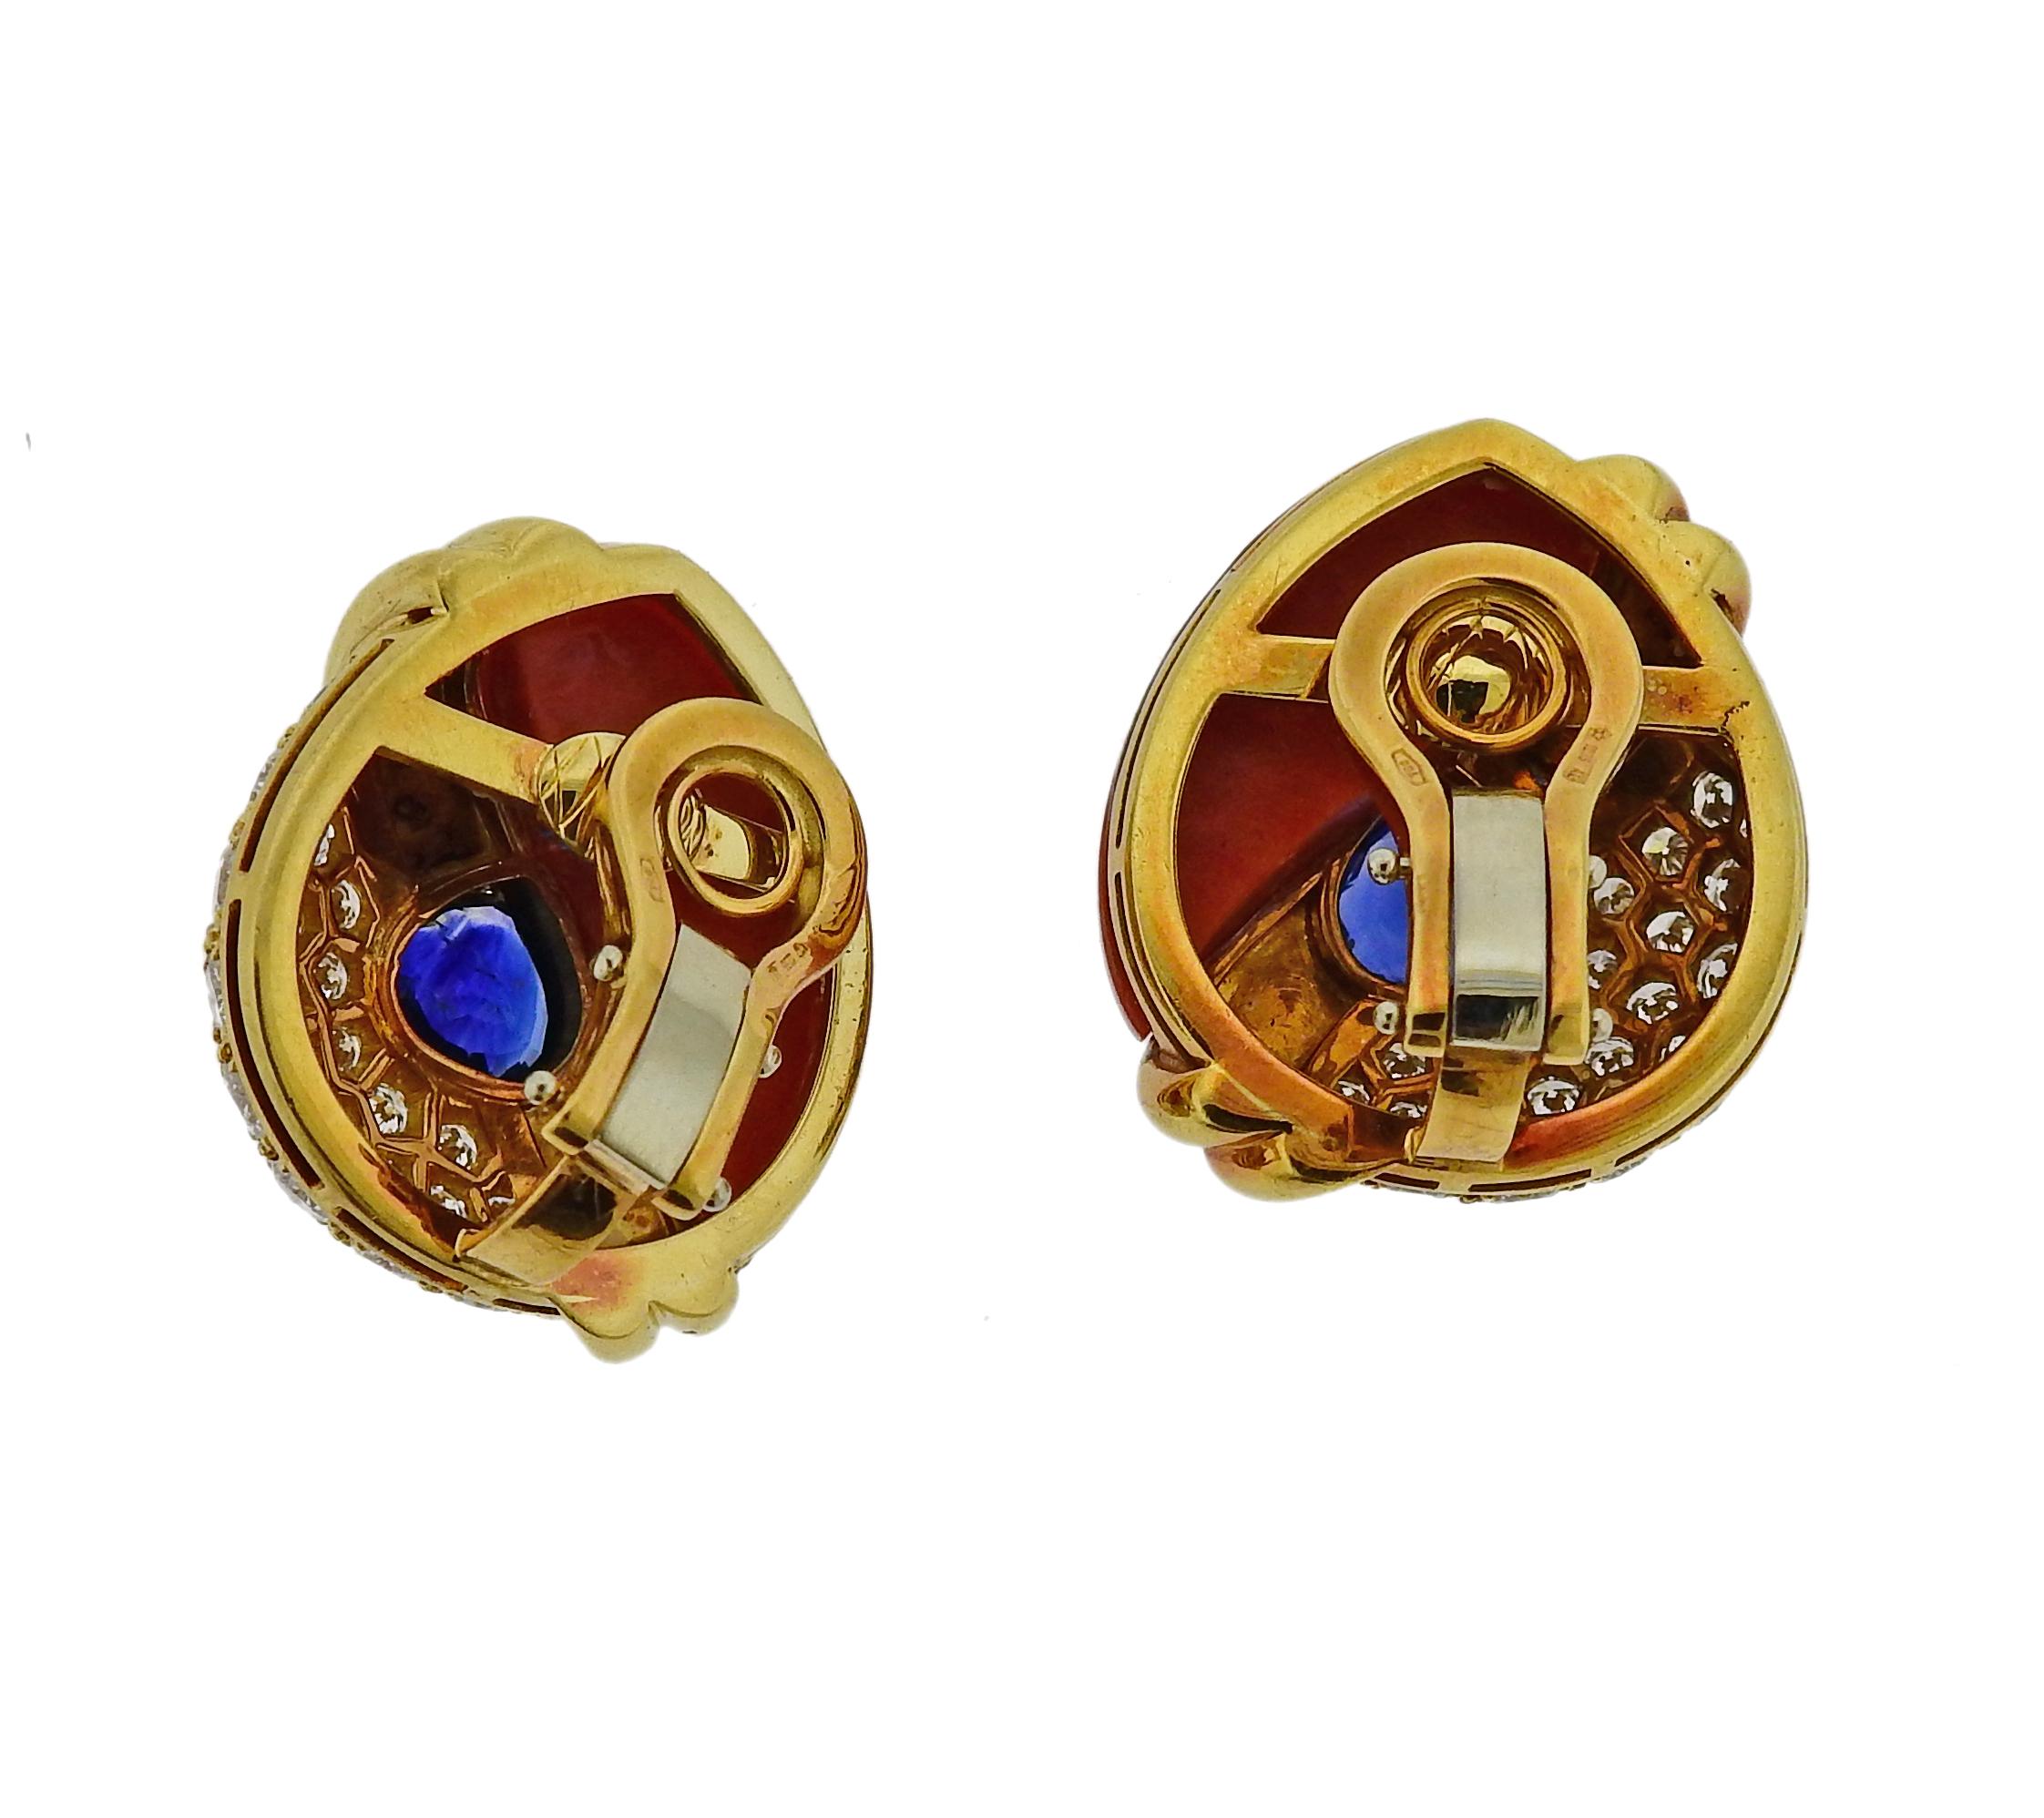 Beautiful 18k gold earrings, adorned with sapphires, coral and approx. 2.30ctw in G/VS-SI1 diamonds. Earrings are measured  26mm x 21mm. Weight is 
23.2 grams. Marked:  750, 1235 AL.